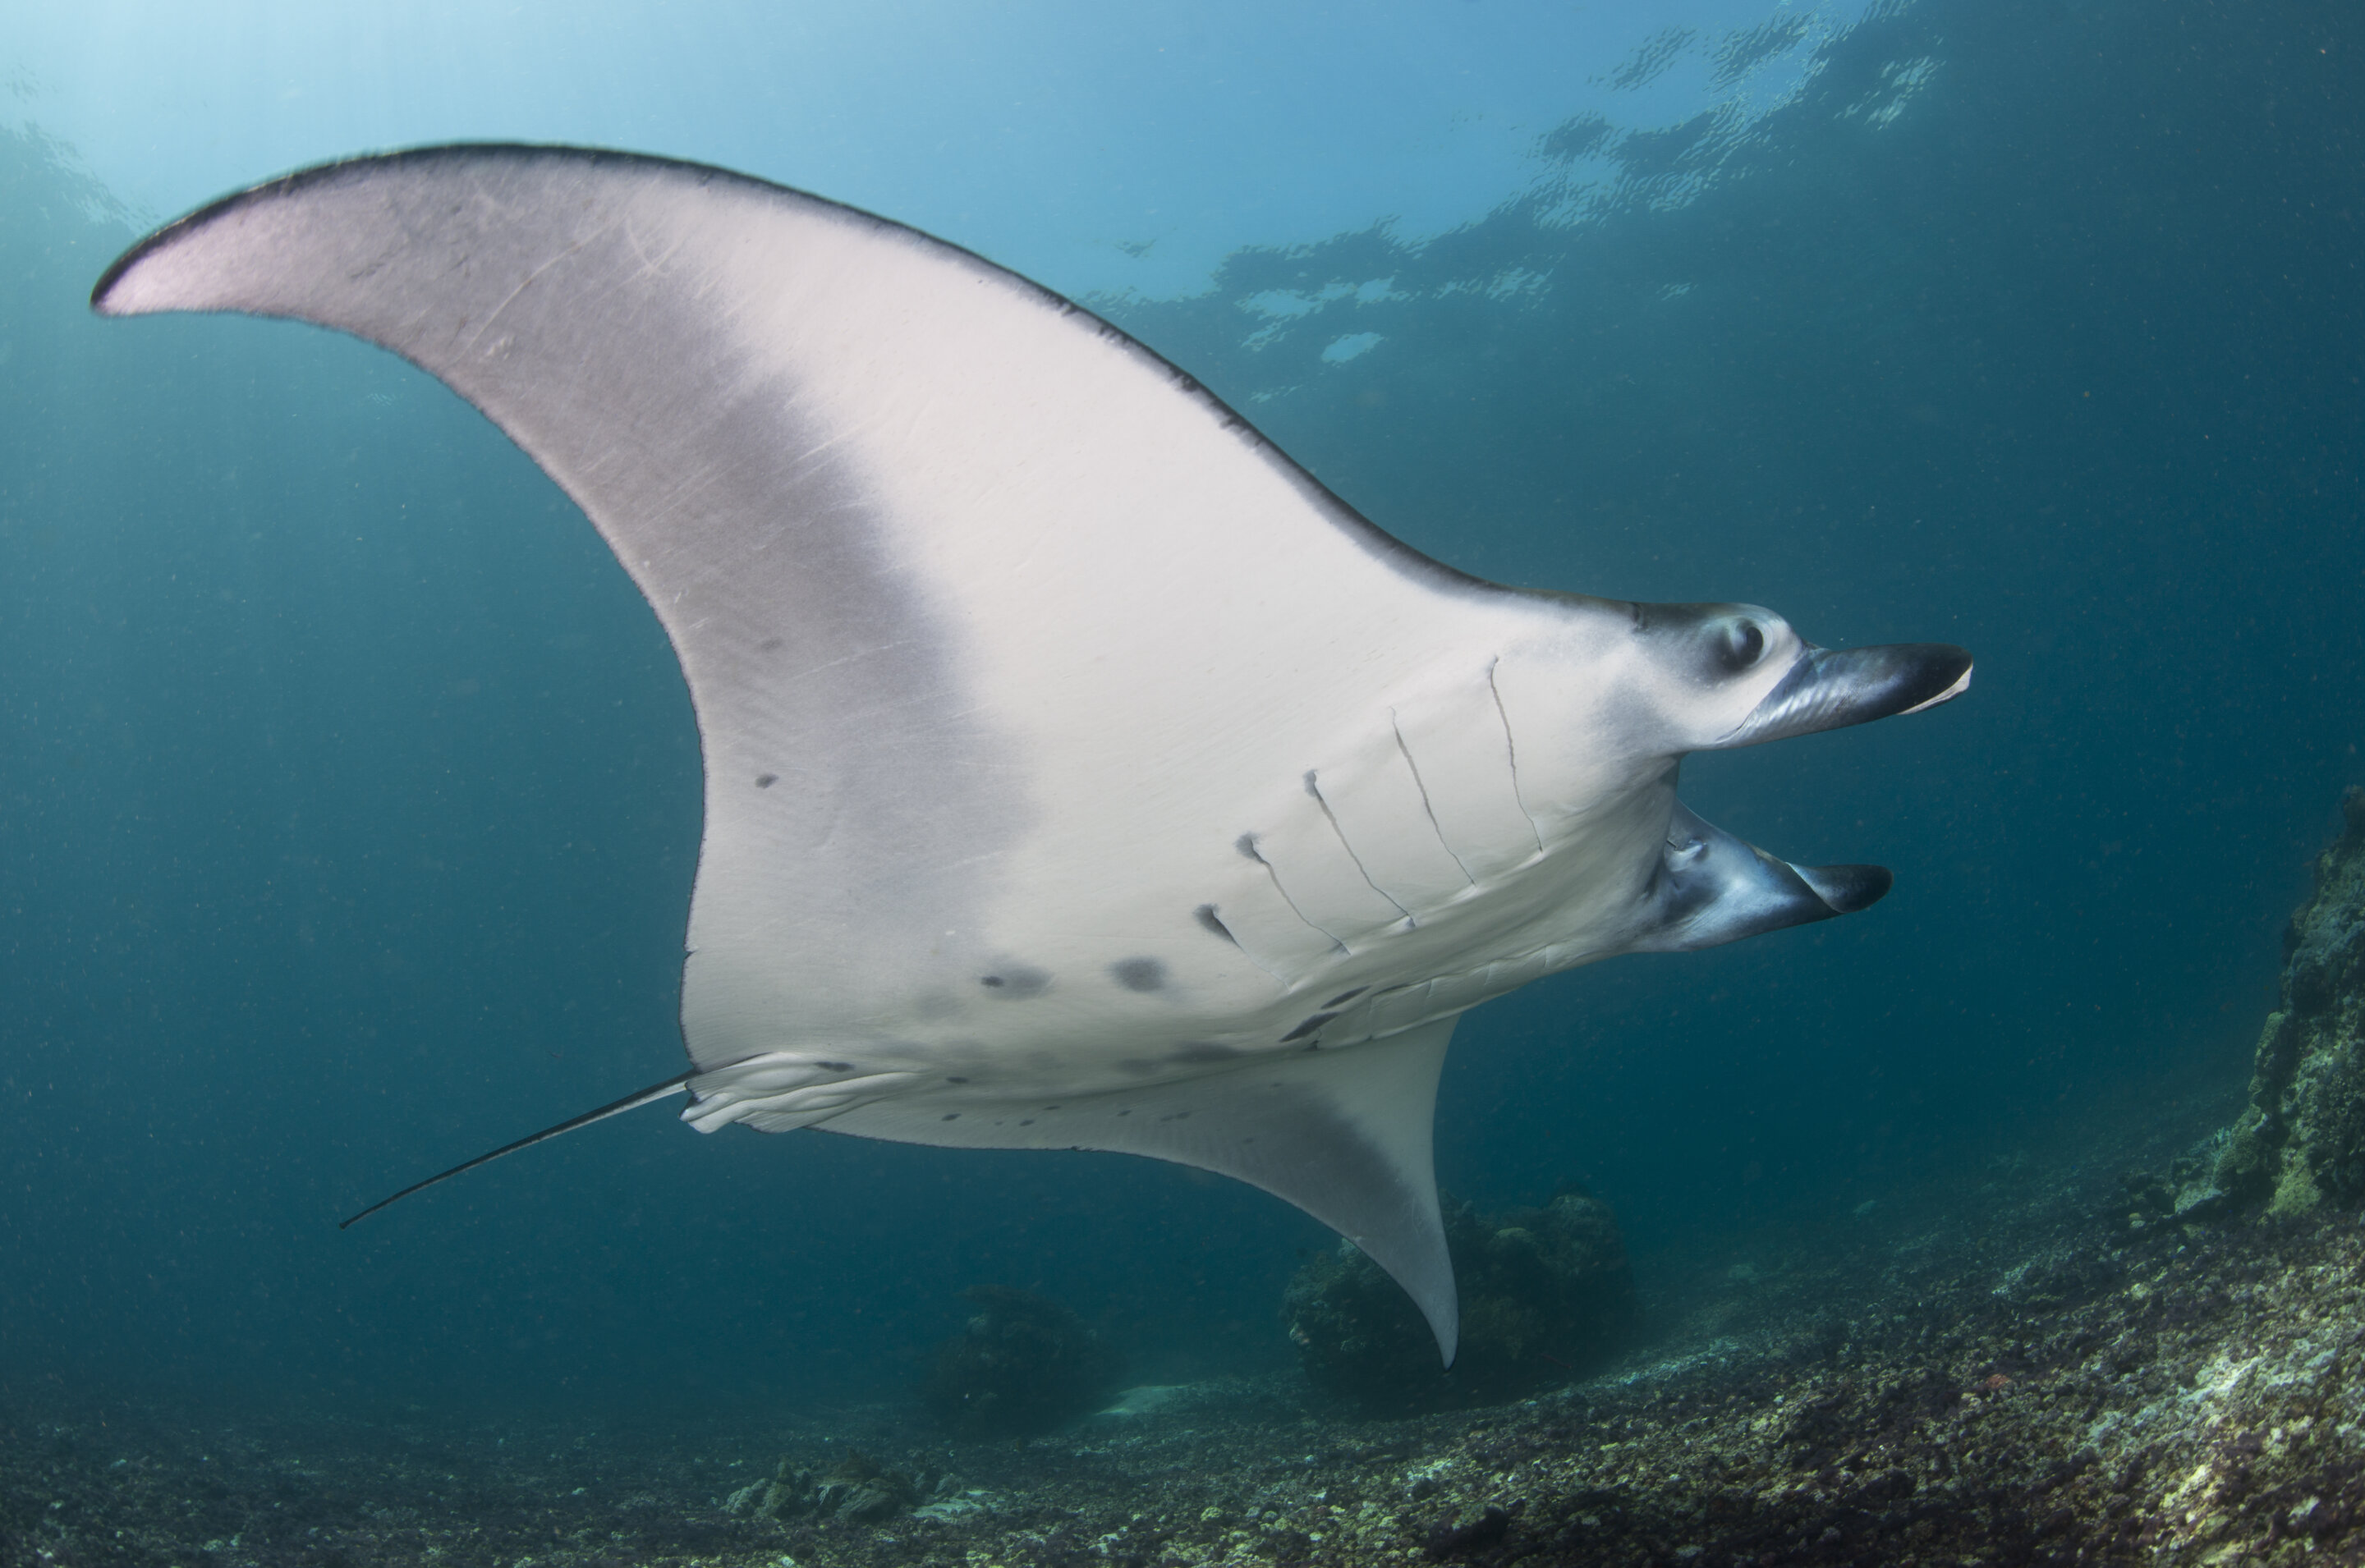 Komodo National Park is home to some of the world's largest manta ray aggregatio..